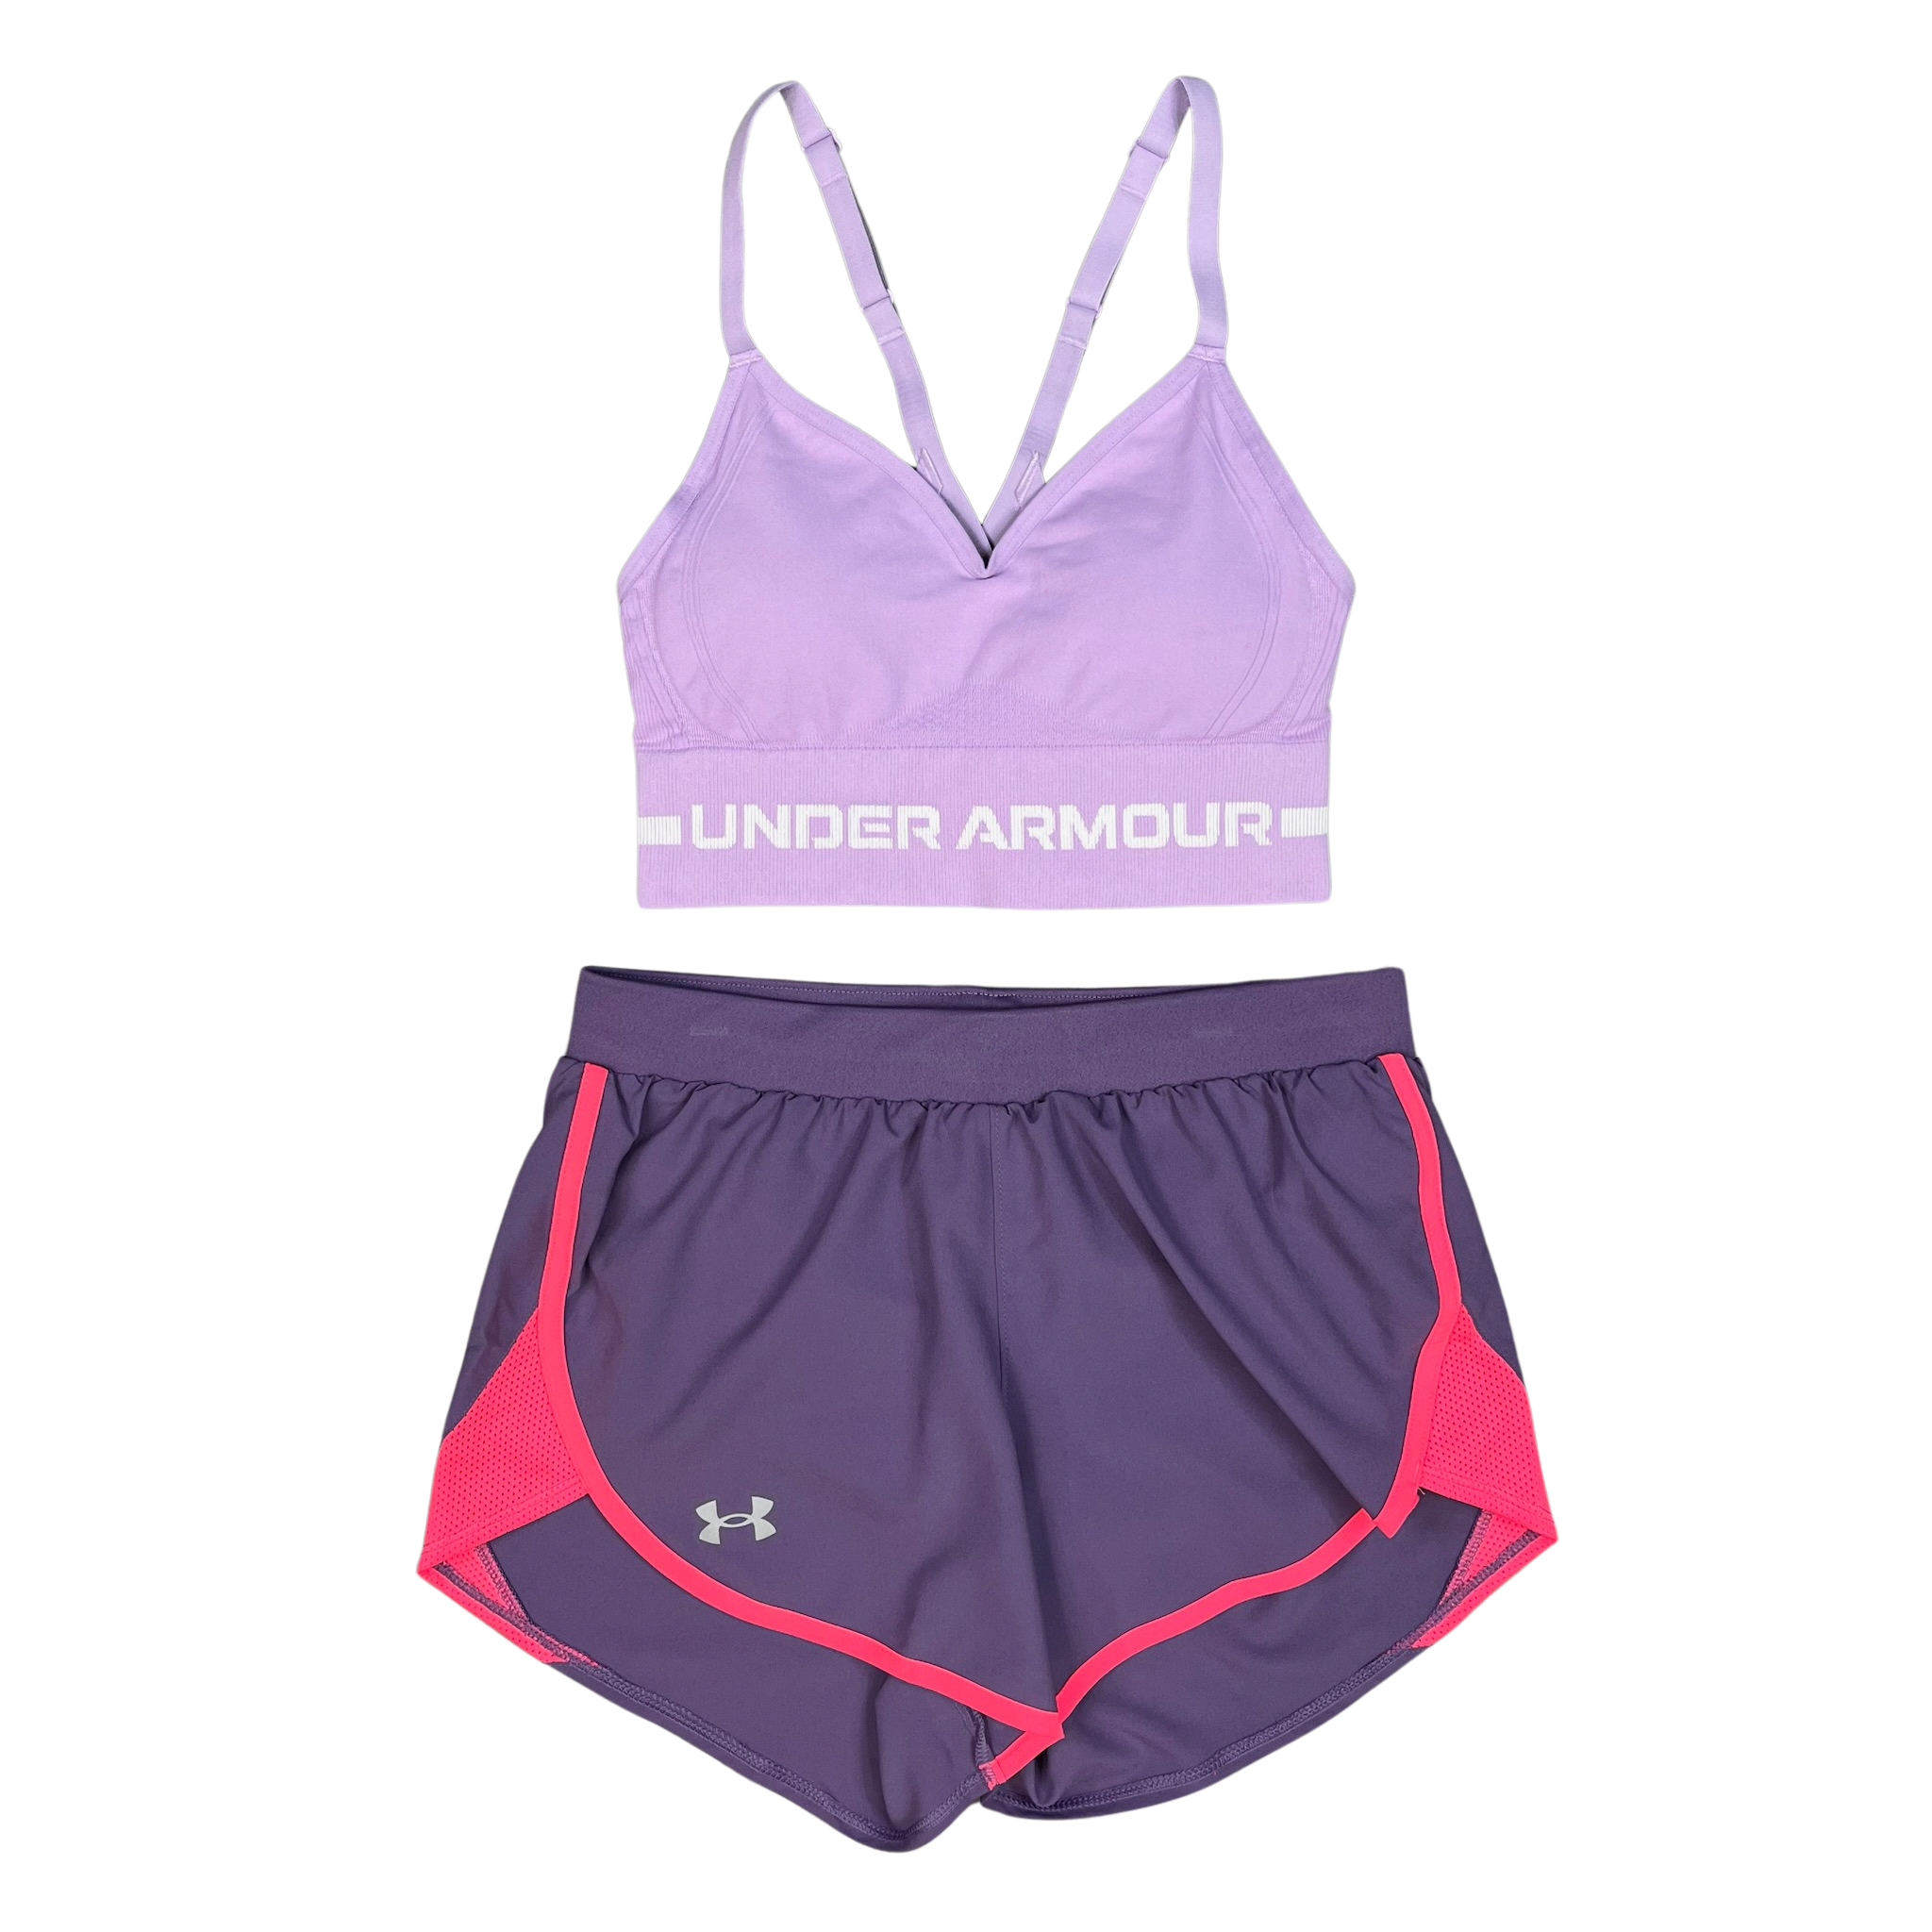 UNDER ARMOUR WOMEN’S SEAMLESS BRA FLY SHORTS SET - LILAC/PINK